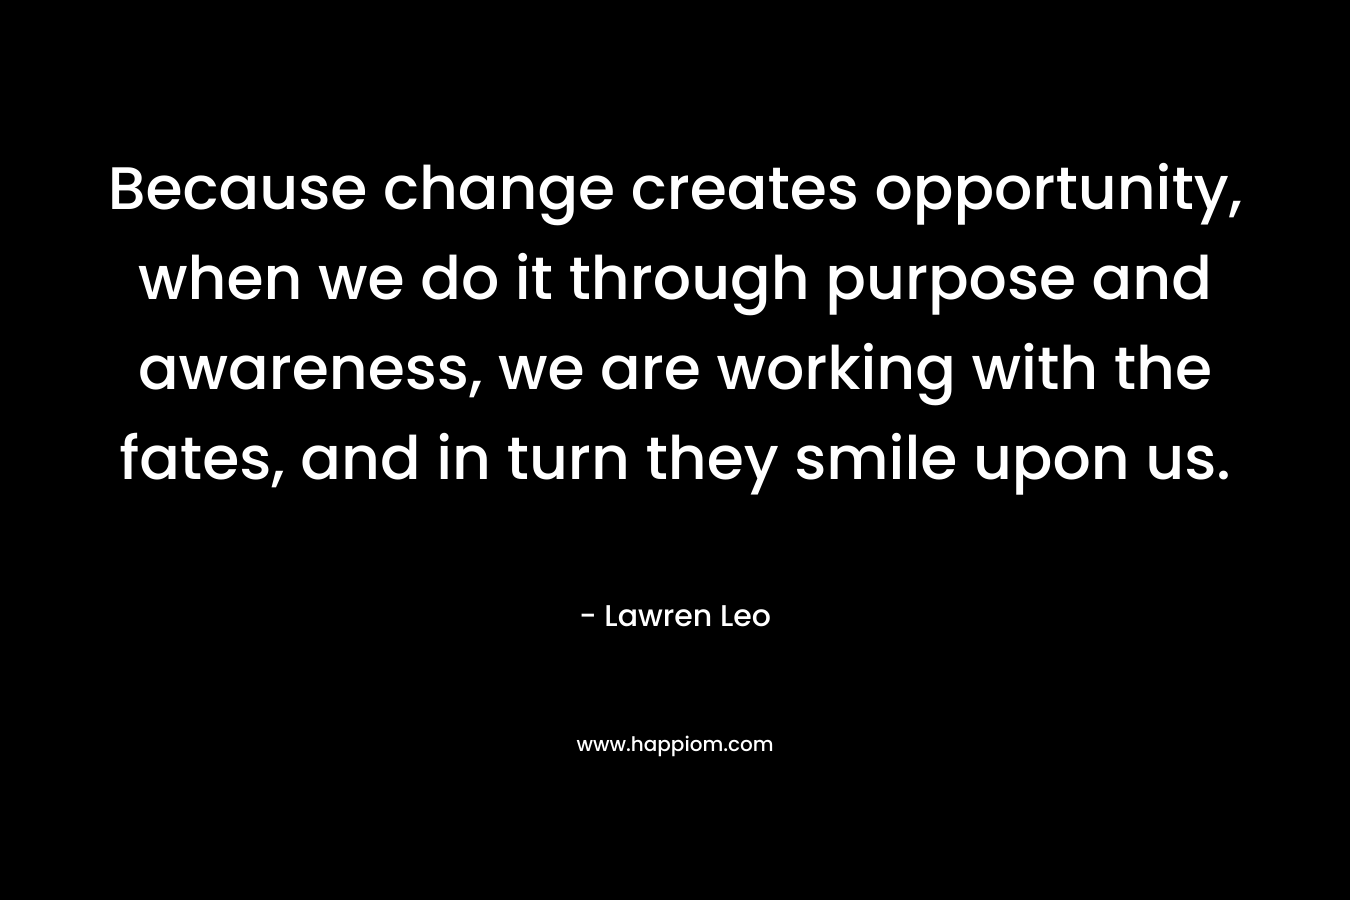 Because change creates opportunity, when we do it through purpose and awareness, we are working with the fates, and in turn they smile upon us. – Lawren Leo